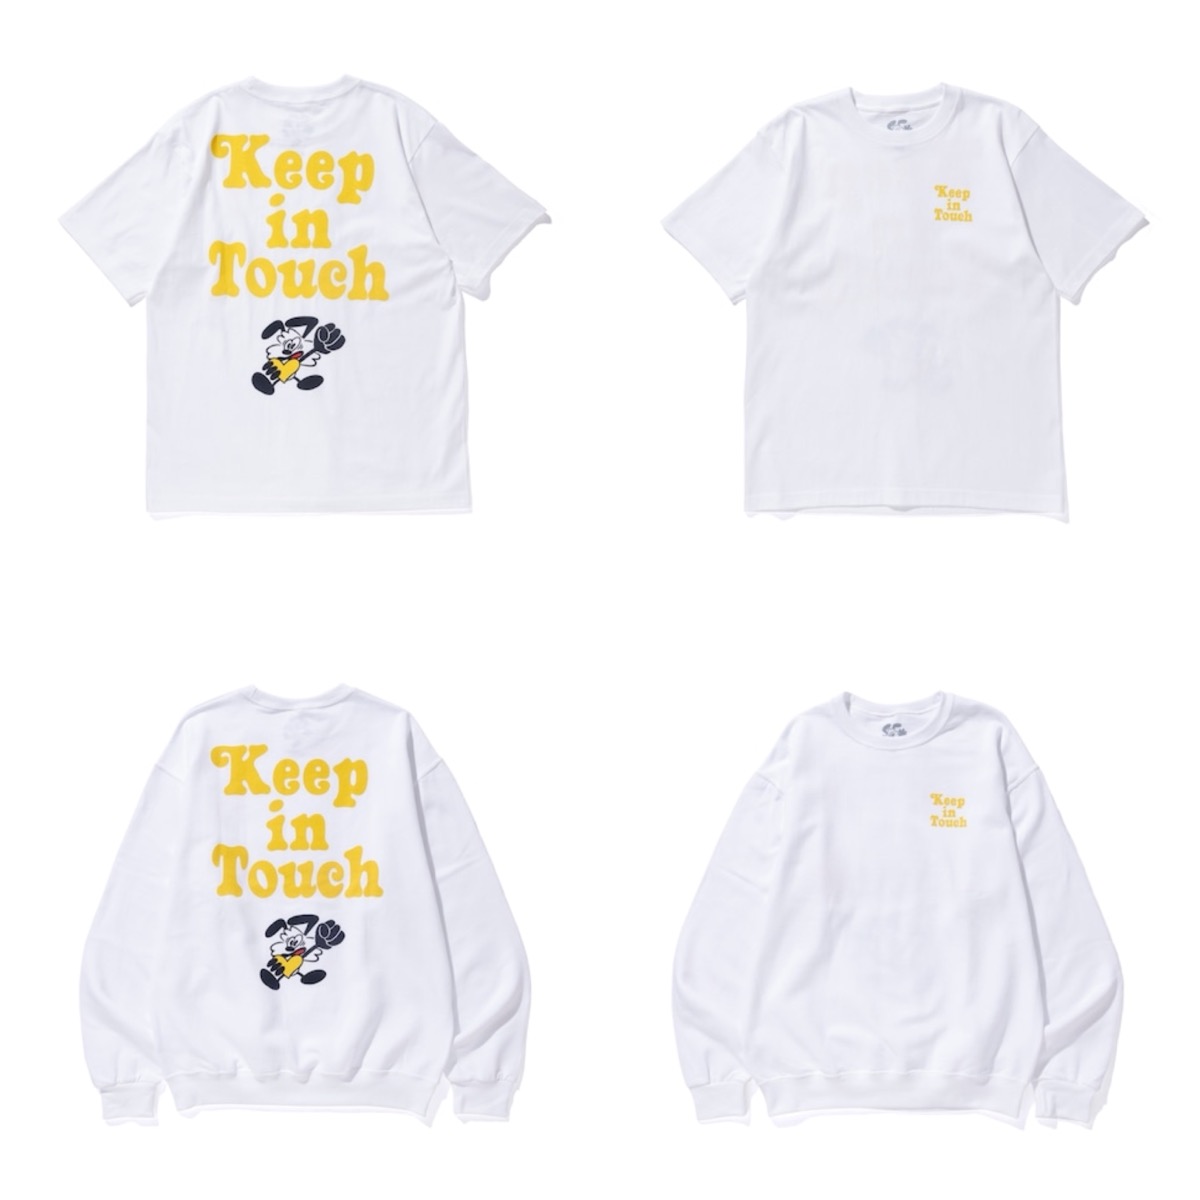 VERDY × Kit Gallery “KEEP IN TOUCH” TシャツのWEB抽選販売が国内11月